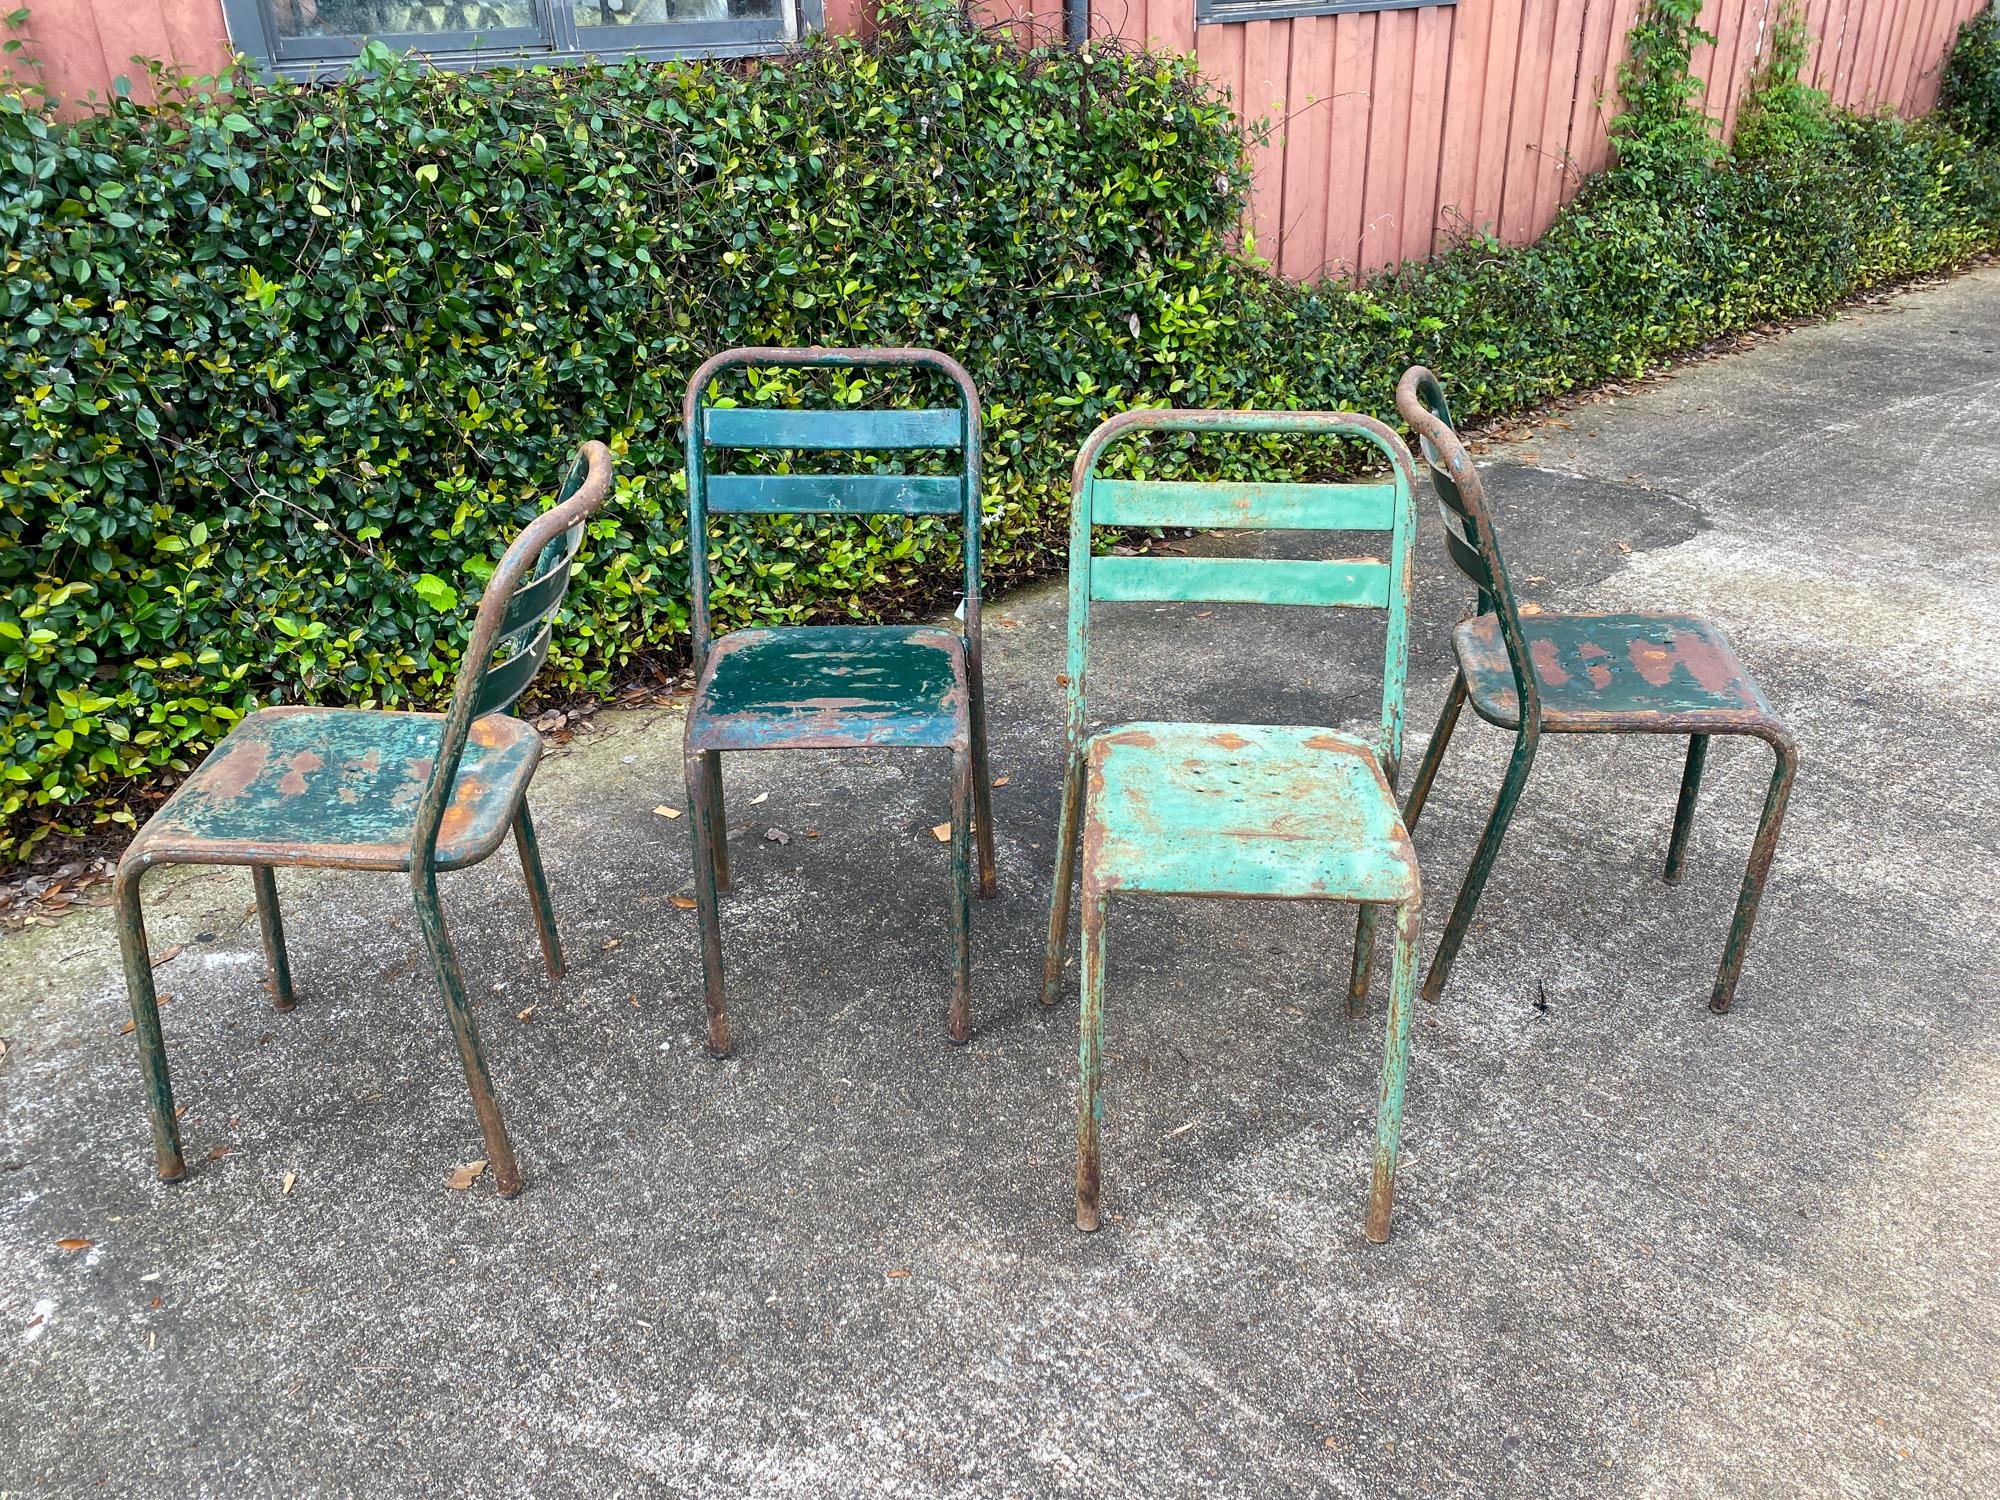 Four rustic, industrial metal chairs in a painted green finish found in France. These chairs easily stack and are all very sturdy. The painted finish does have rust and chipping and one chair is painted a lighter tone of green. The seats have